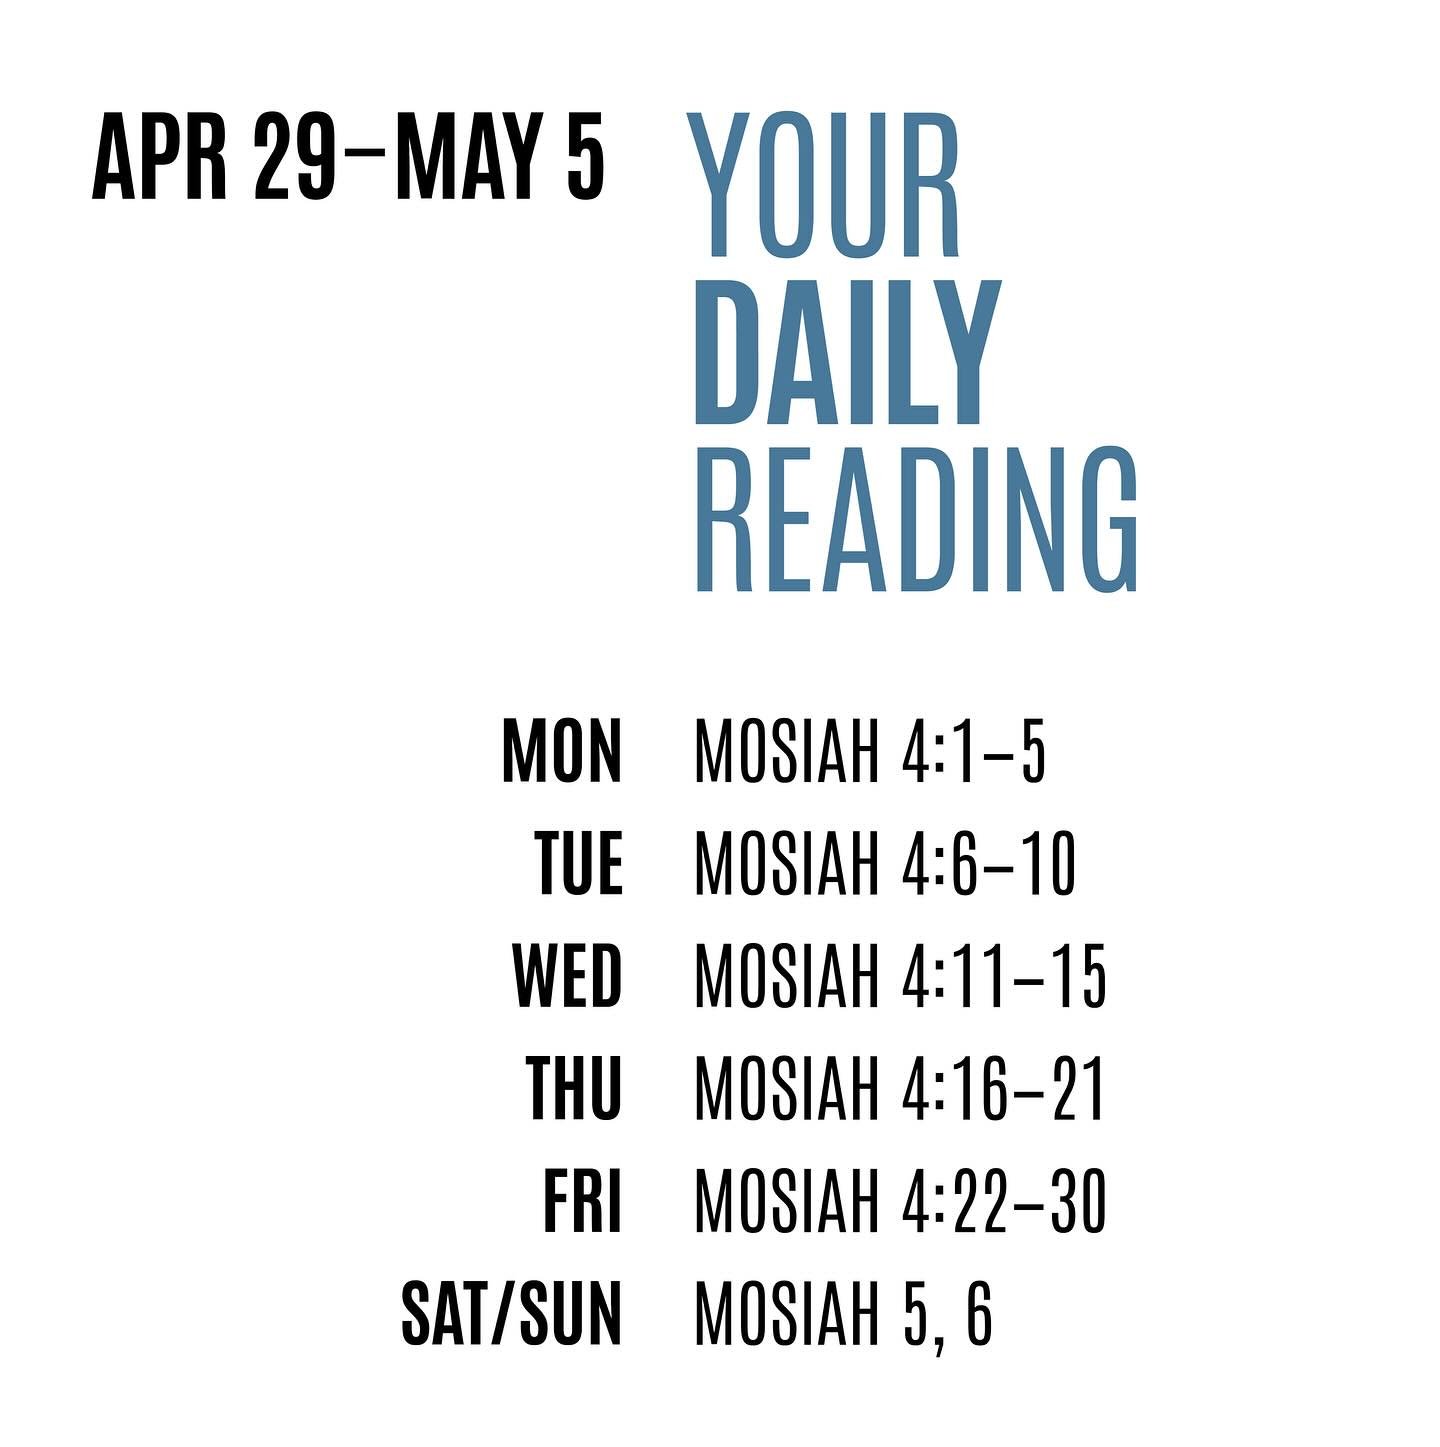 This week in Come, Follow Me we will be studying Mosiah 4-6 in the Book of Mormon.

 
Here are the segments you can look forward to:

SEGMENT ONE: ALL YOU NEED IS NEED

SEGMENT TWO: THE MAN.  THE MEANS. 

SEGMENT THREE: TASTED OF LOVE

SEGMENT FOUR: 